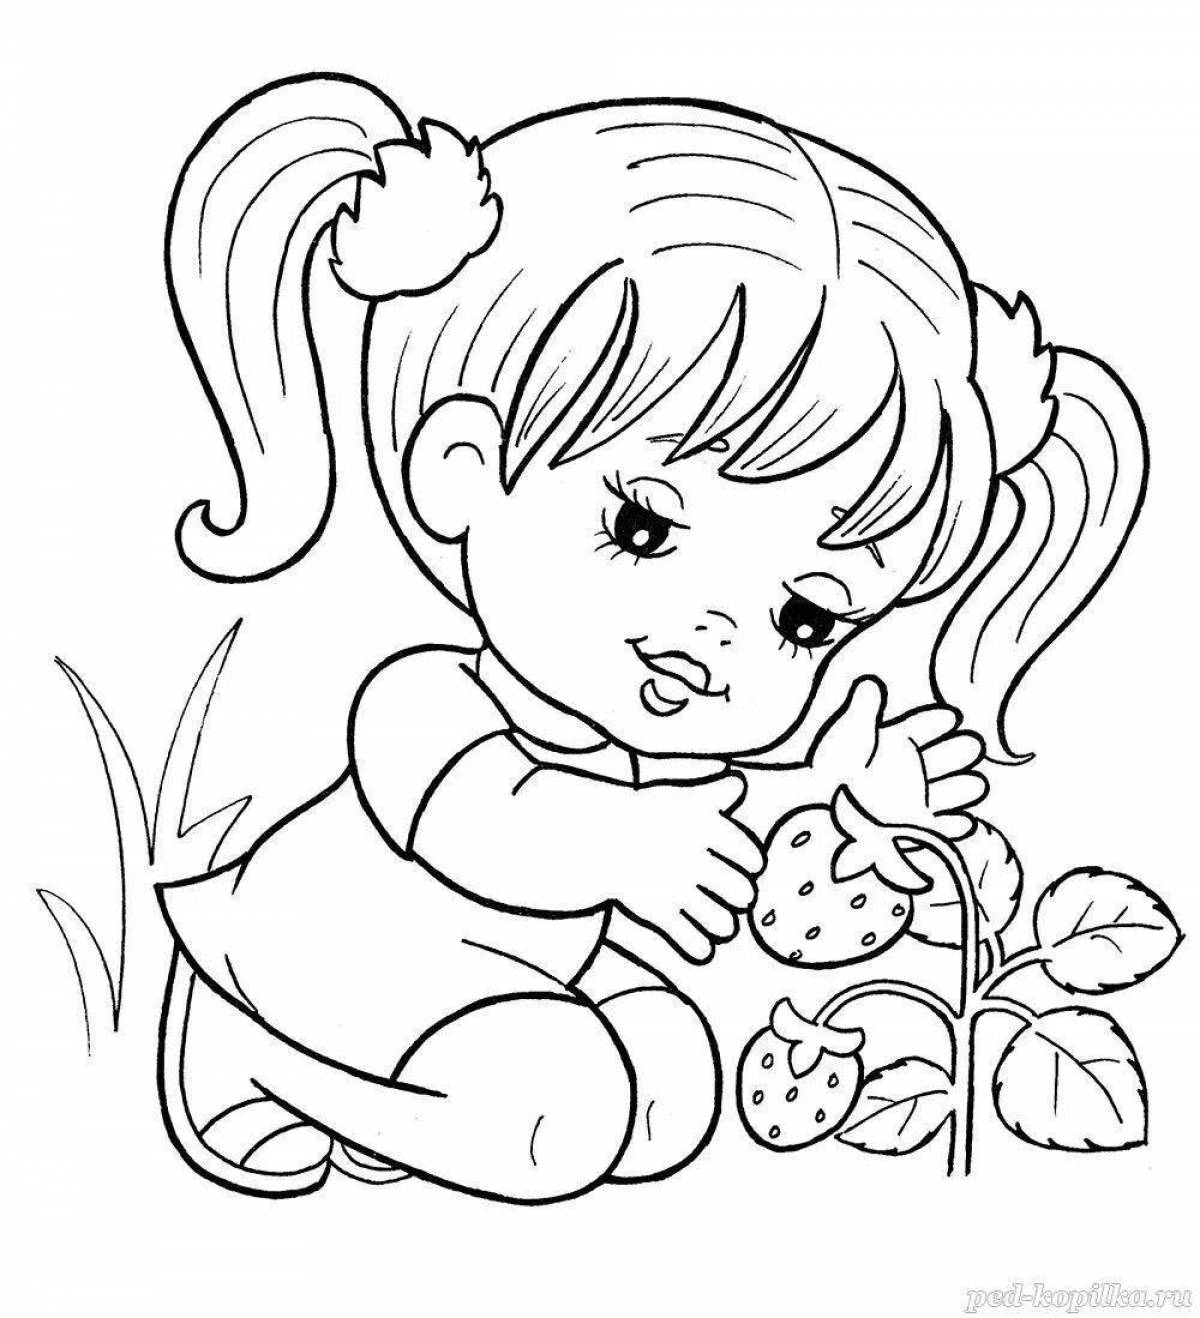 Fairytale coloring book for 1 year old girls